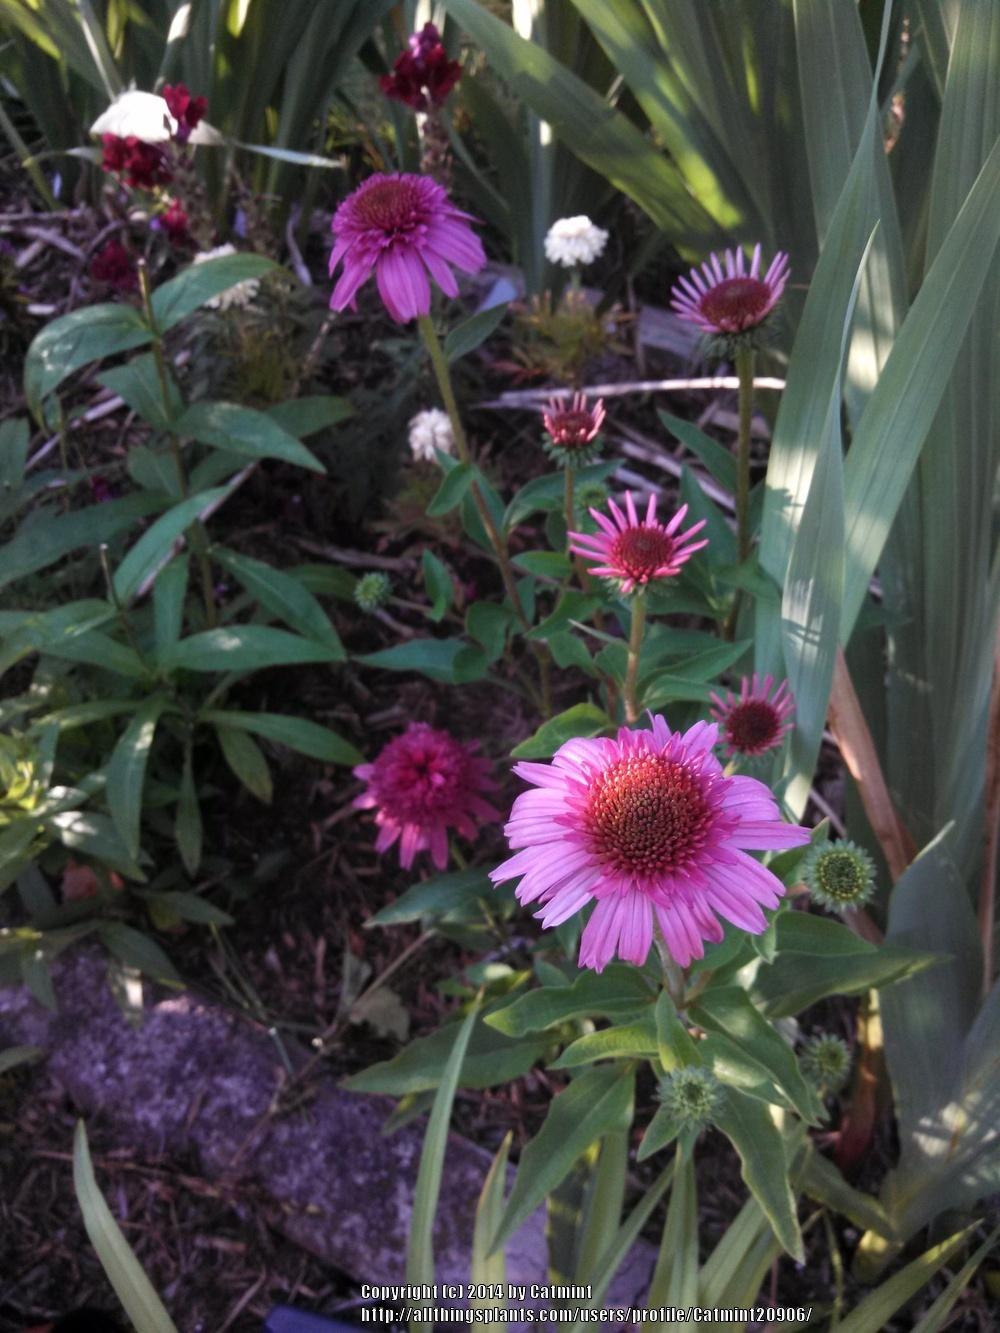 Photo of Coneflower (Echinacea 'Secret Affair') uploaded by Catmint20906